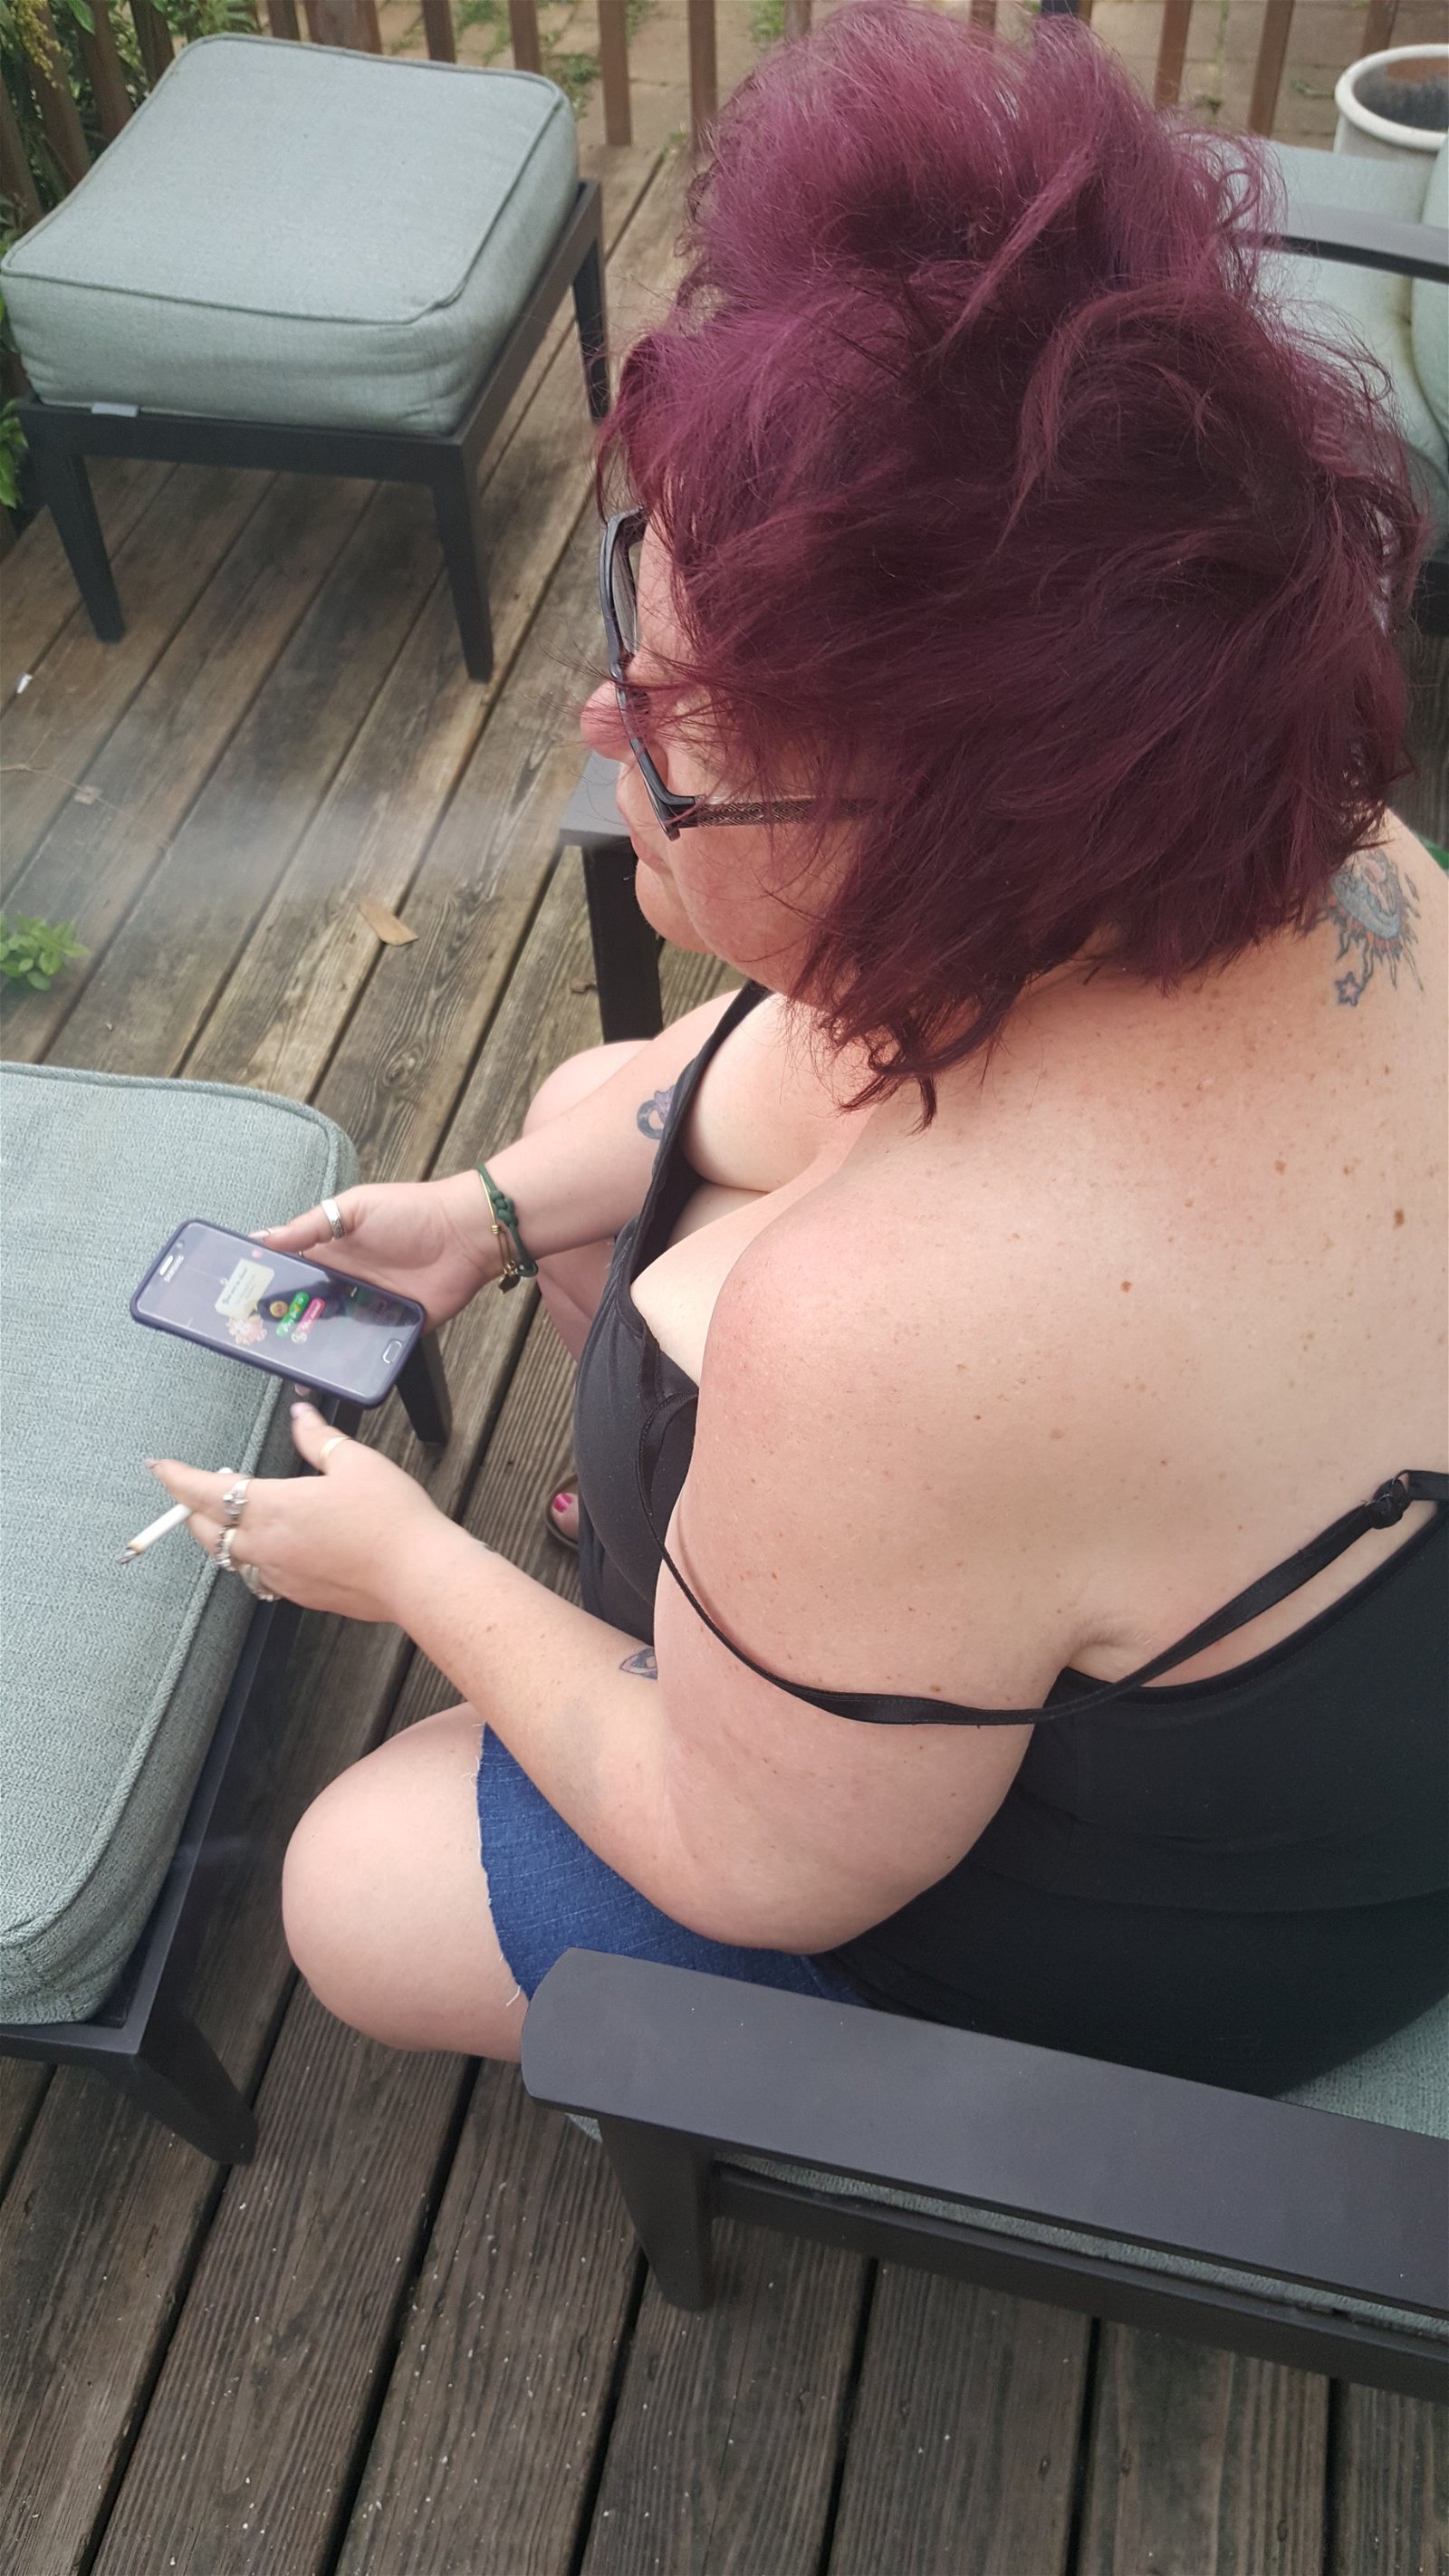 Photo by Dawn42D with the username @Dawn42D,  July 28, 2017 at 1:56 PM and the text says 'I love watching the Mrs smoke. She has some serious sex hair going on in these. #bbw  #bbw  #wife  #smoking  #smoking  #wife  #smoking  #fetish  #cleavage  #downblouse  #unaware  #wife  #sex  #hair  #don't  #care  #WVHotBBW  #wvhb  #Dawn42D'